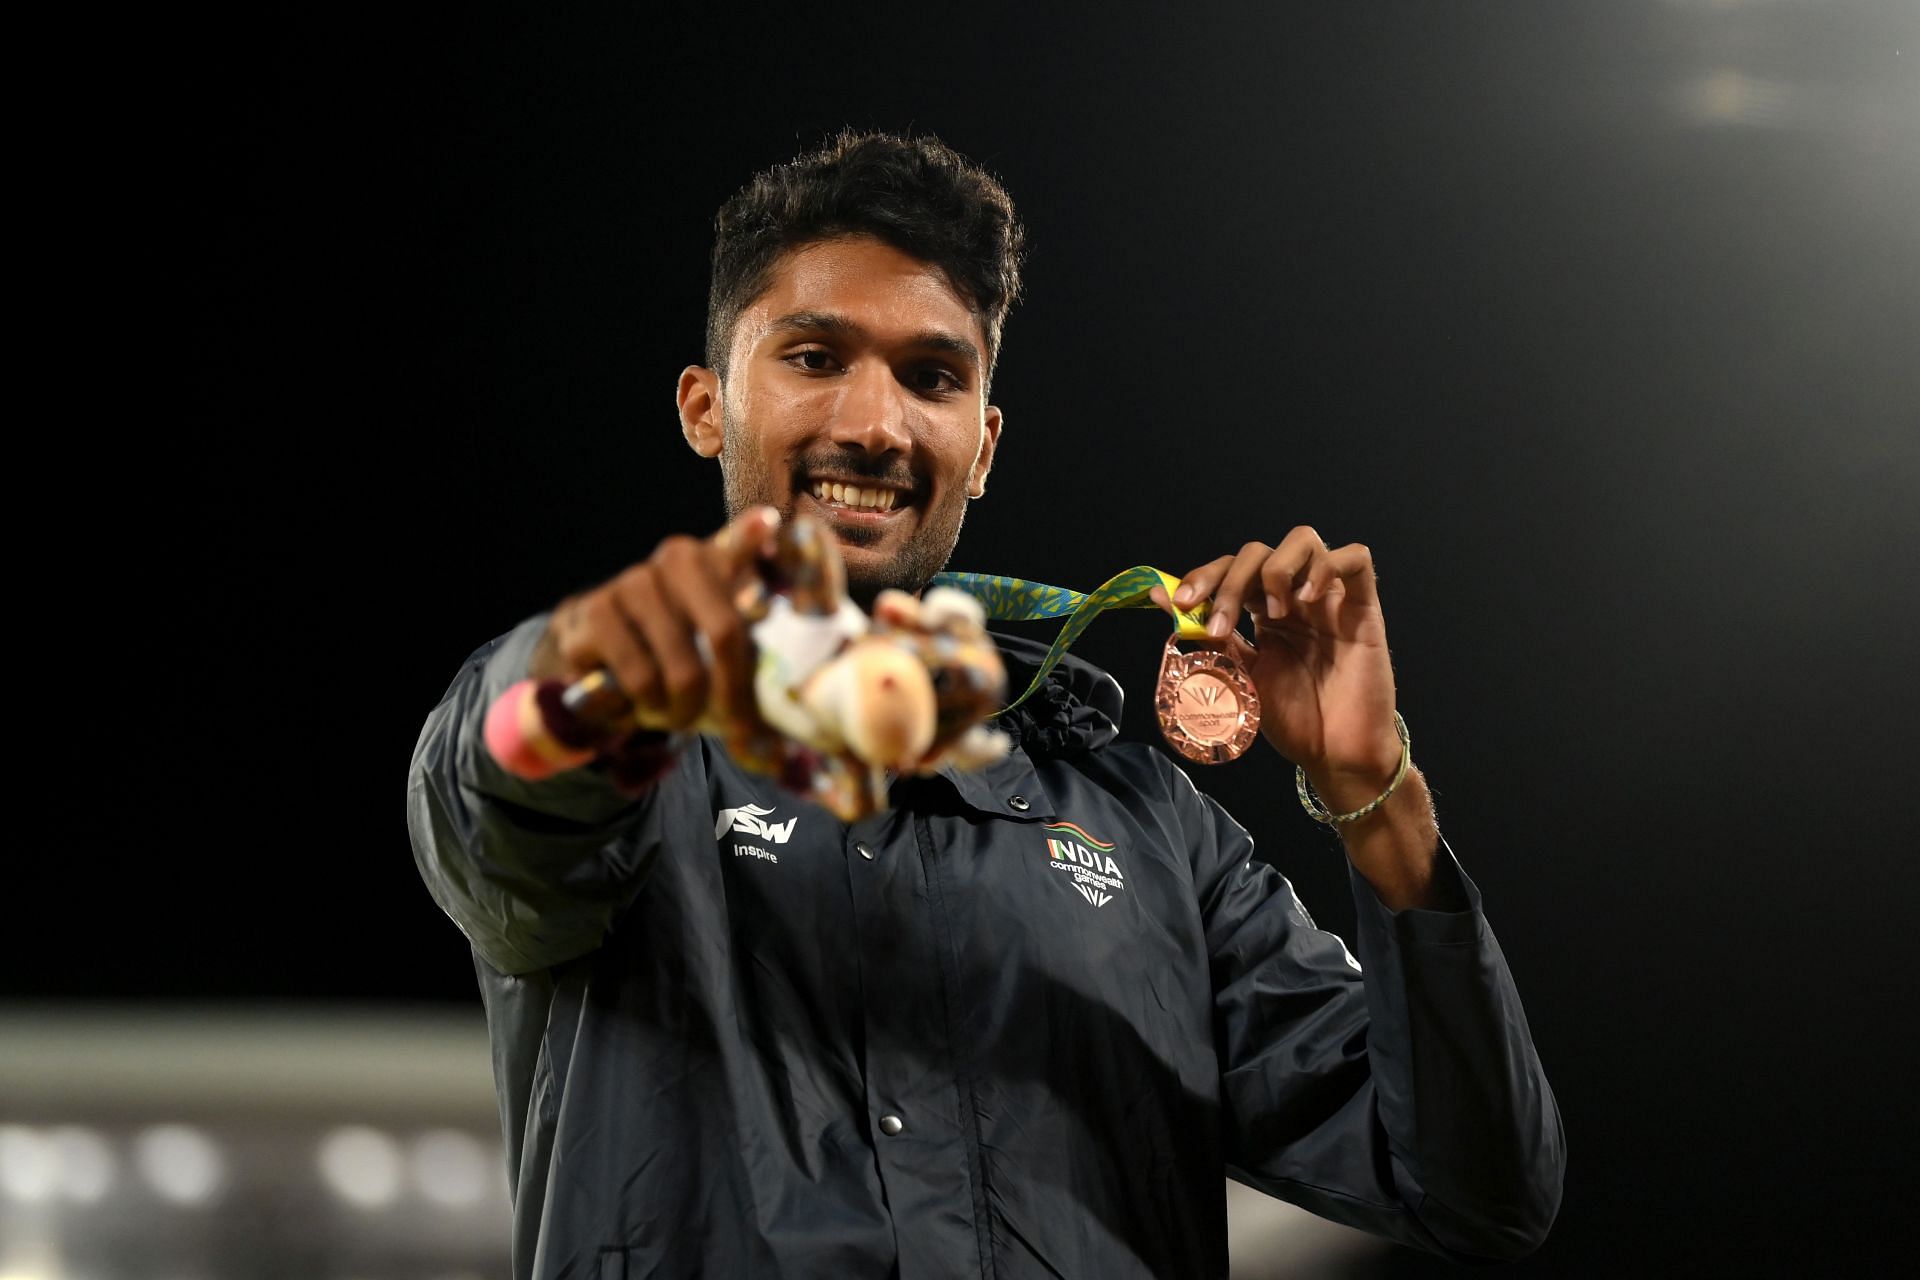 Tejaswin Shankar with the bronze medal (Image Courtesy: Getty)